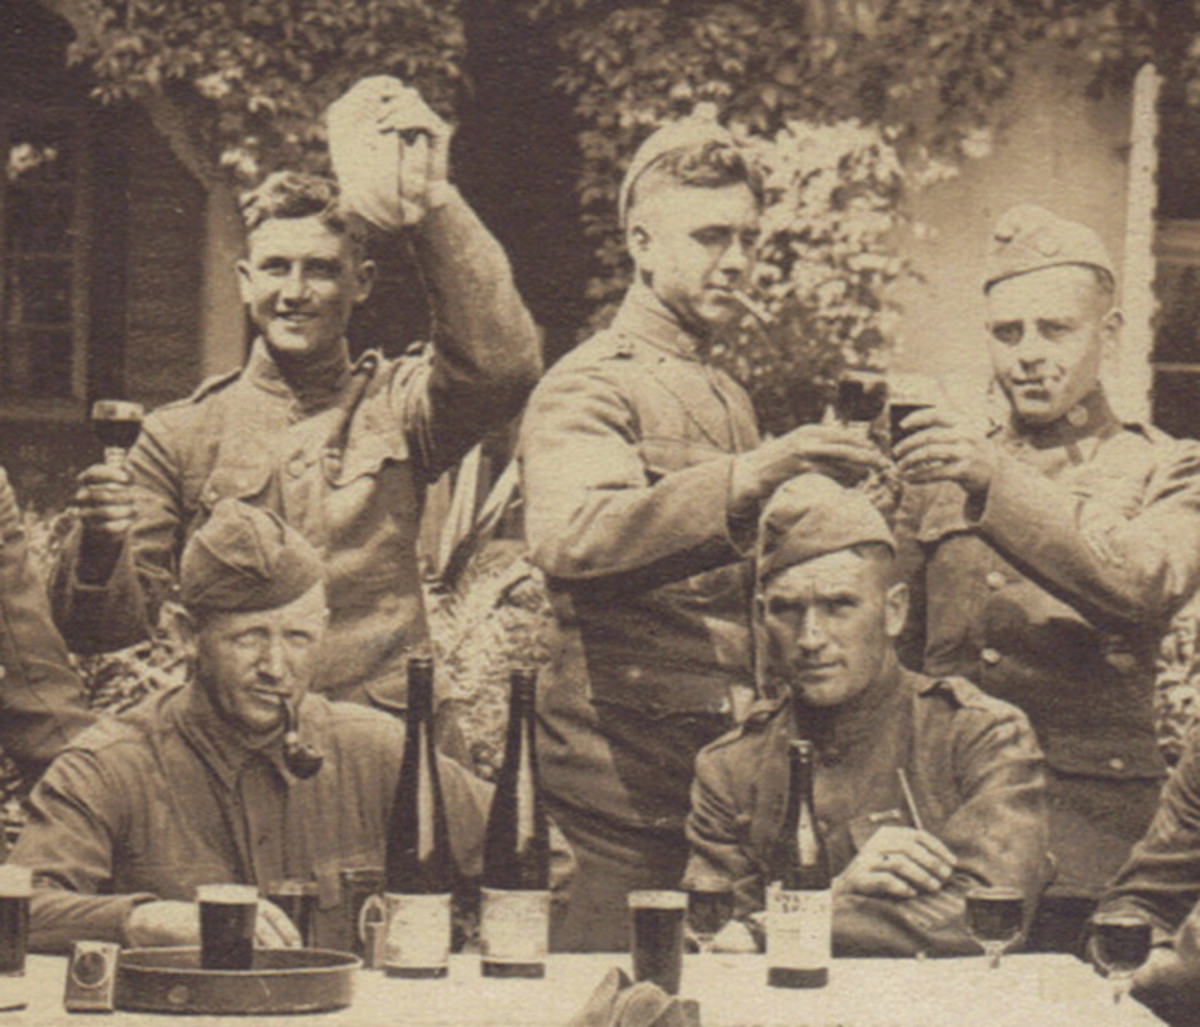 The seated soldier on the right has four overseas stripes and is ignoring the two soldiers toasting behind his head. The pipe smoking soldier on the left has leaned his tin of pipe tobacco (recognizable as Prince Albert tobacco) and box of matches against a wine bottle.